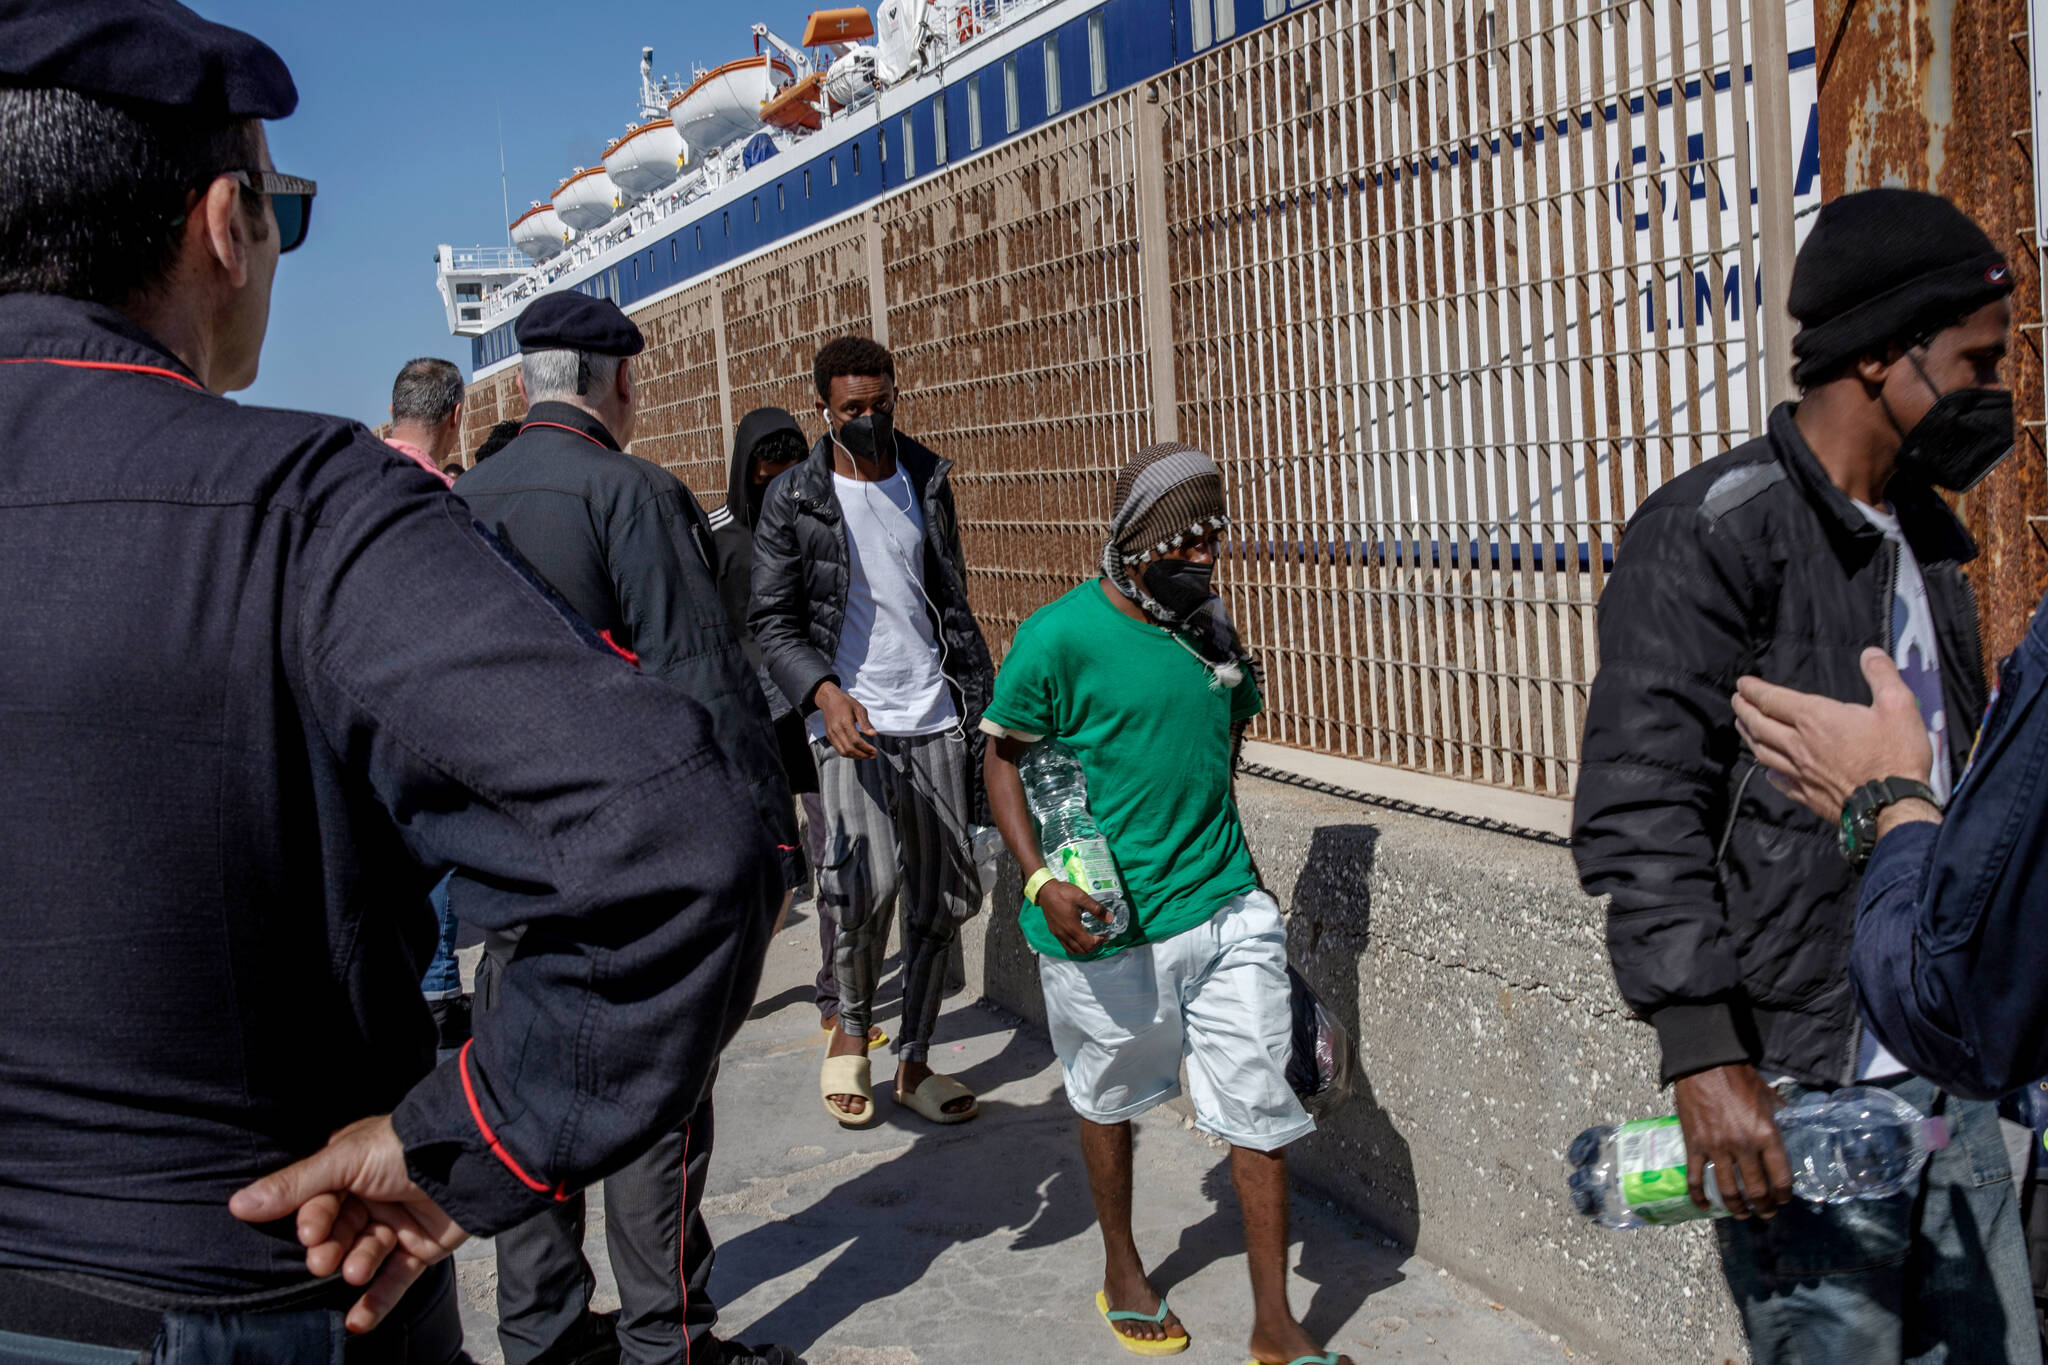 Detained migrants in Italy are moved onto a ferry bound for Sicily, May 4, 2023. (Fabio Bucciarelli/The New York Times)